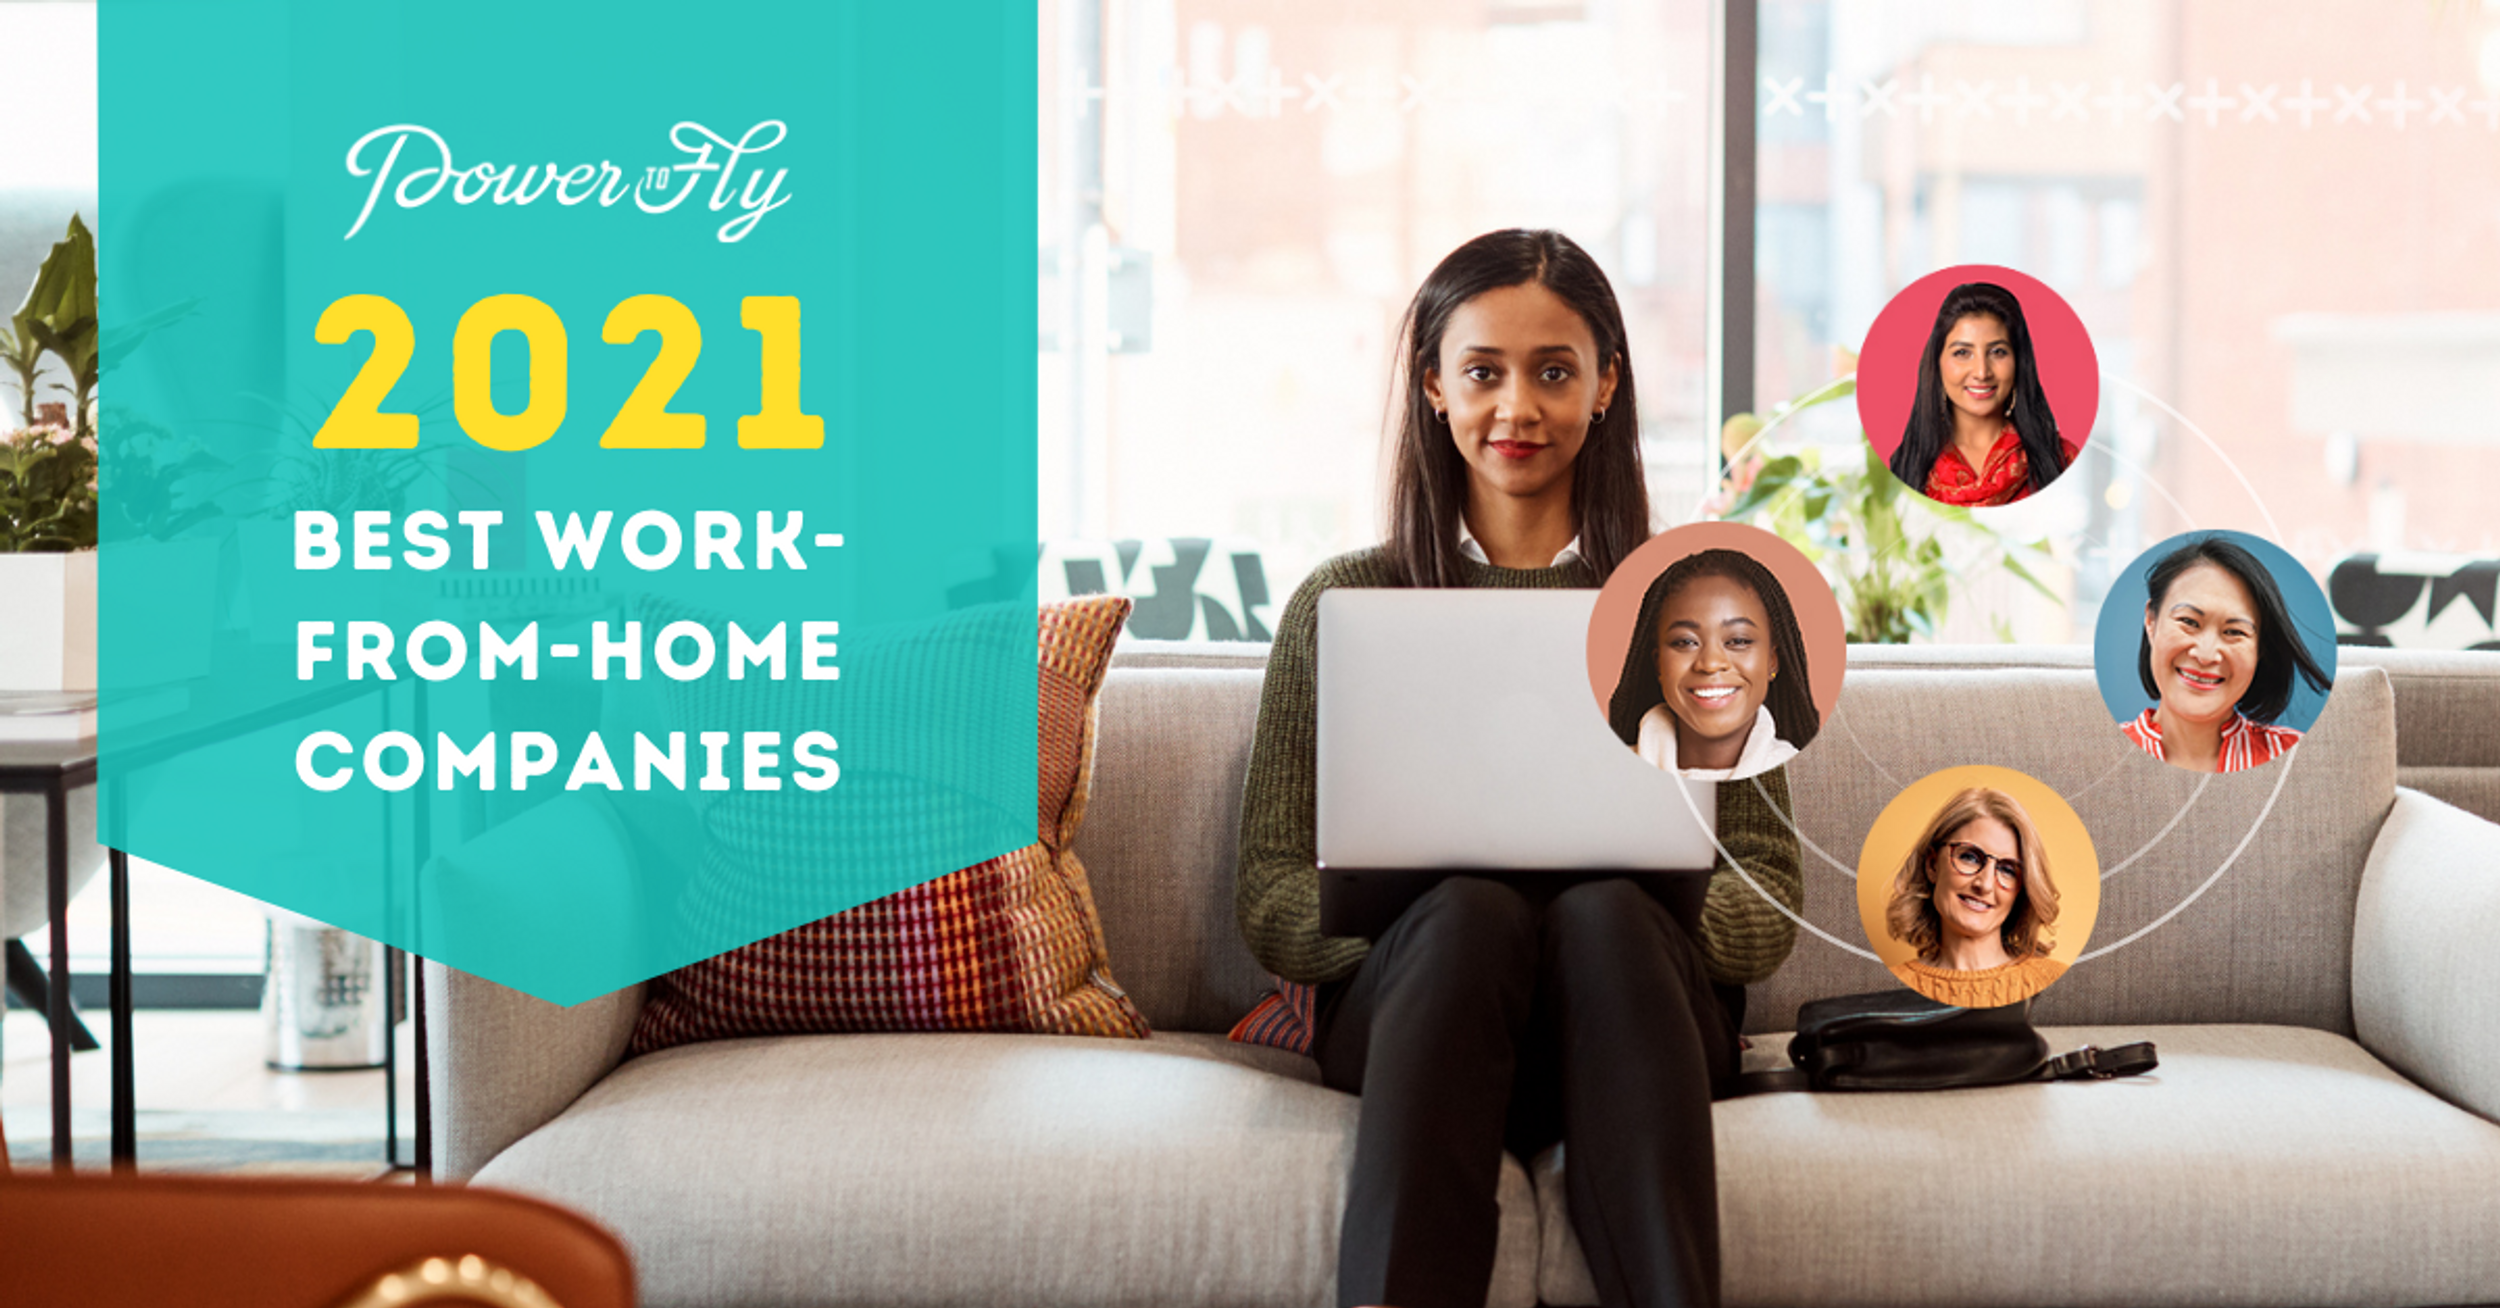 Best Work-From-Home Companies 2021